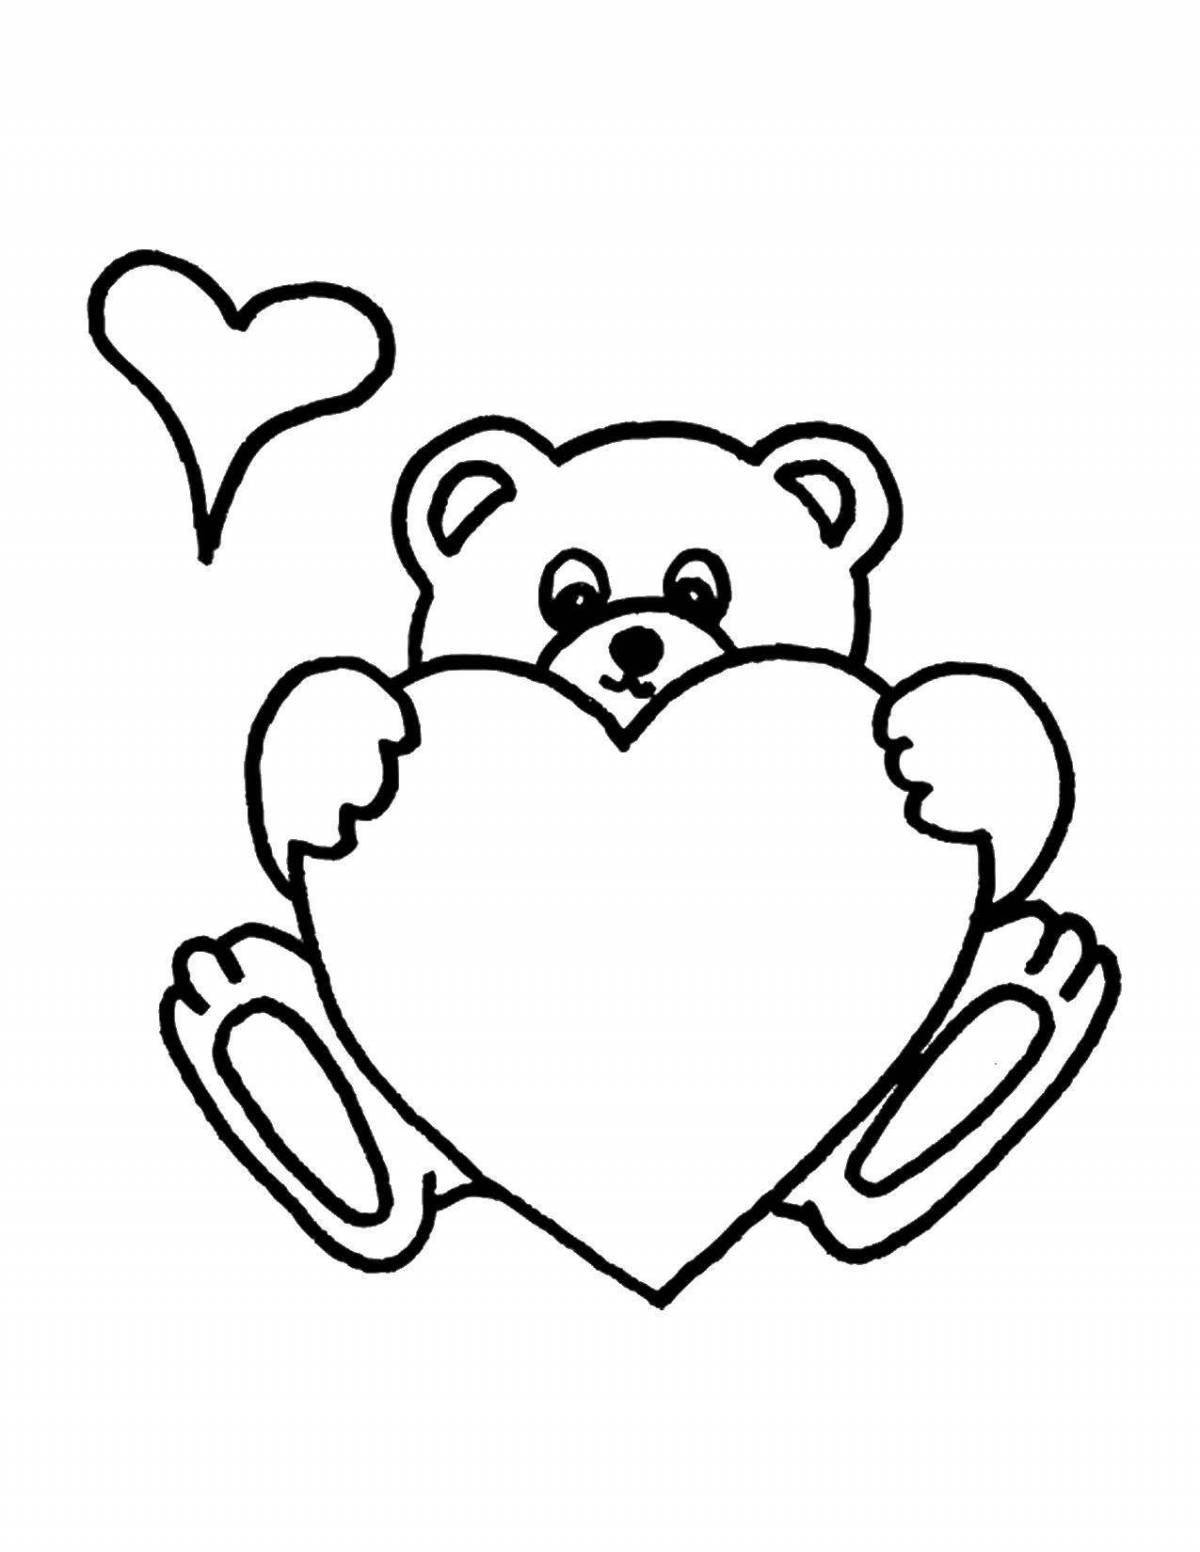 Funny teddy bear with heart coloring book